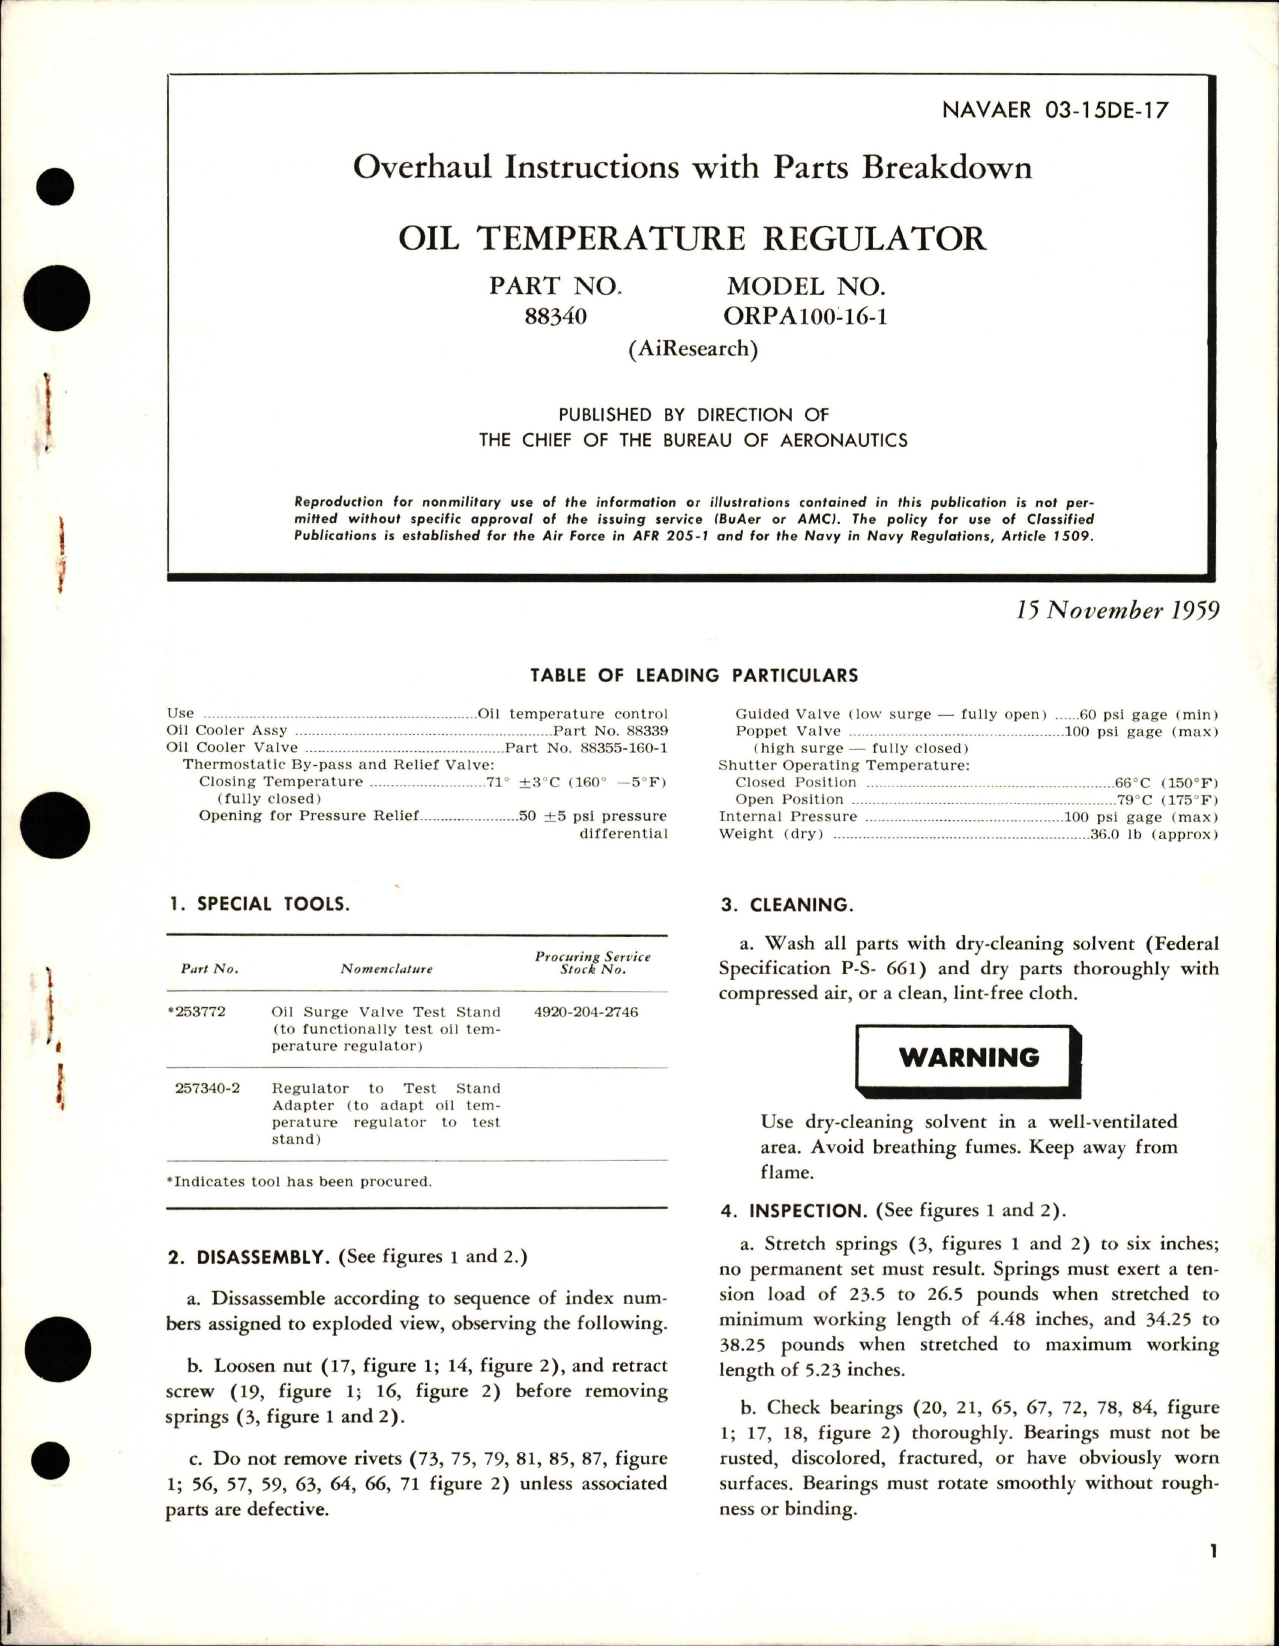 Sample page 1 from AirCorps Library document: Overhaul Instructions with Parts Breakdown for Oil Temperature Regulator - Part 88340 - Model ORPA100-16-1